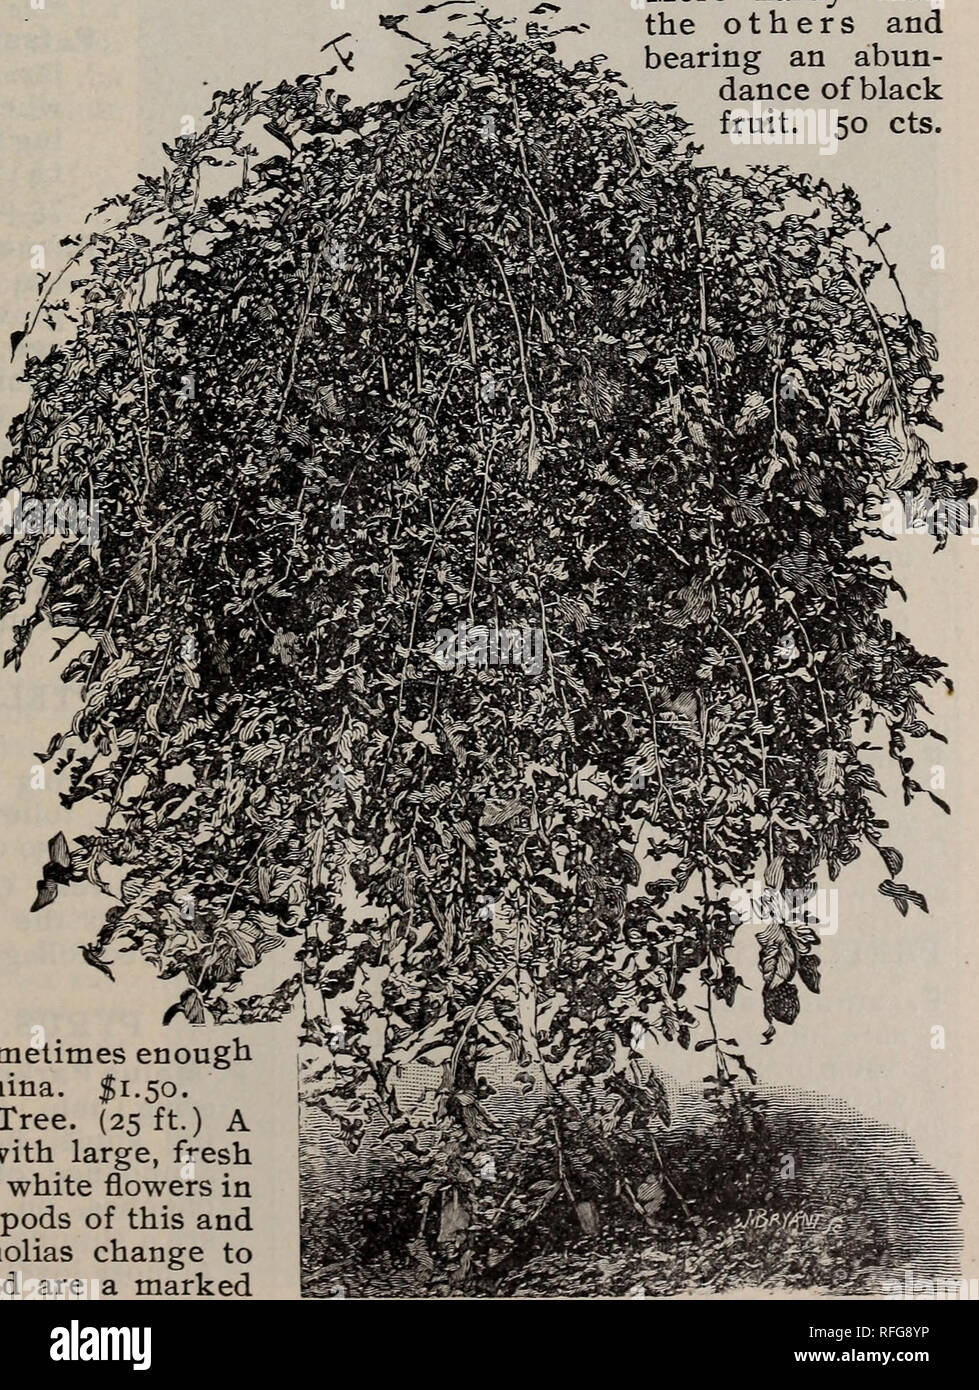 . Descriptive catalogue : trees, shrubs and plants. Nursery stock, New York (State), New York, Catalogs; Trees, Seedlings, Catalogs; Shrubs, Catalogs; Flowers, Catalogs; Fruit, Catalogs. FLUSHING, NEW YORK 11 Magnolia glauca. Sweet Bay. (15 ft.) A small tree common in the swamps of New Jersey; nearly evergreen. Thrives very well on upland soil, and is esteemed for its delicate, white, sweet- scented flowers, appearing in June and filling all the surrounding neighbor- hood with fragrance. America. $1. M. Lenne. Red - flowering Magnolia. (20 ft.) A desirable sort because of its distinct color an Stock Photo